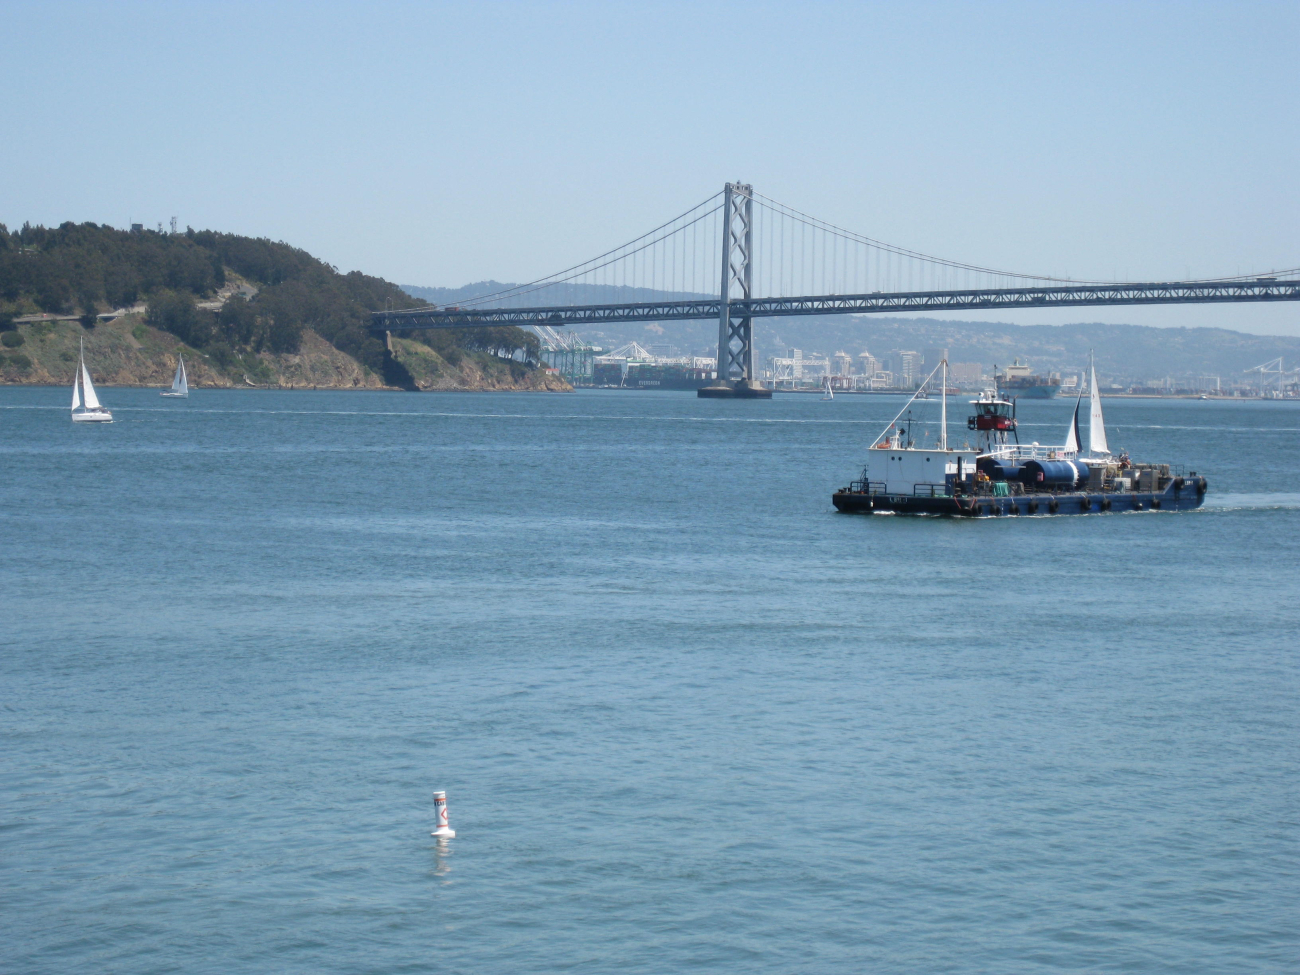 A self-propelled barge plying the waters of San Francisco Bay having just sailedunder the Bay Bridge headed north